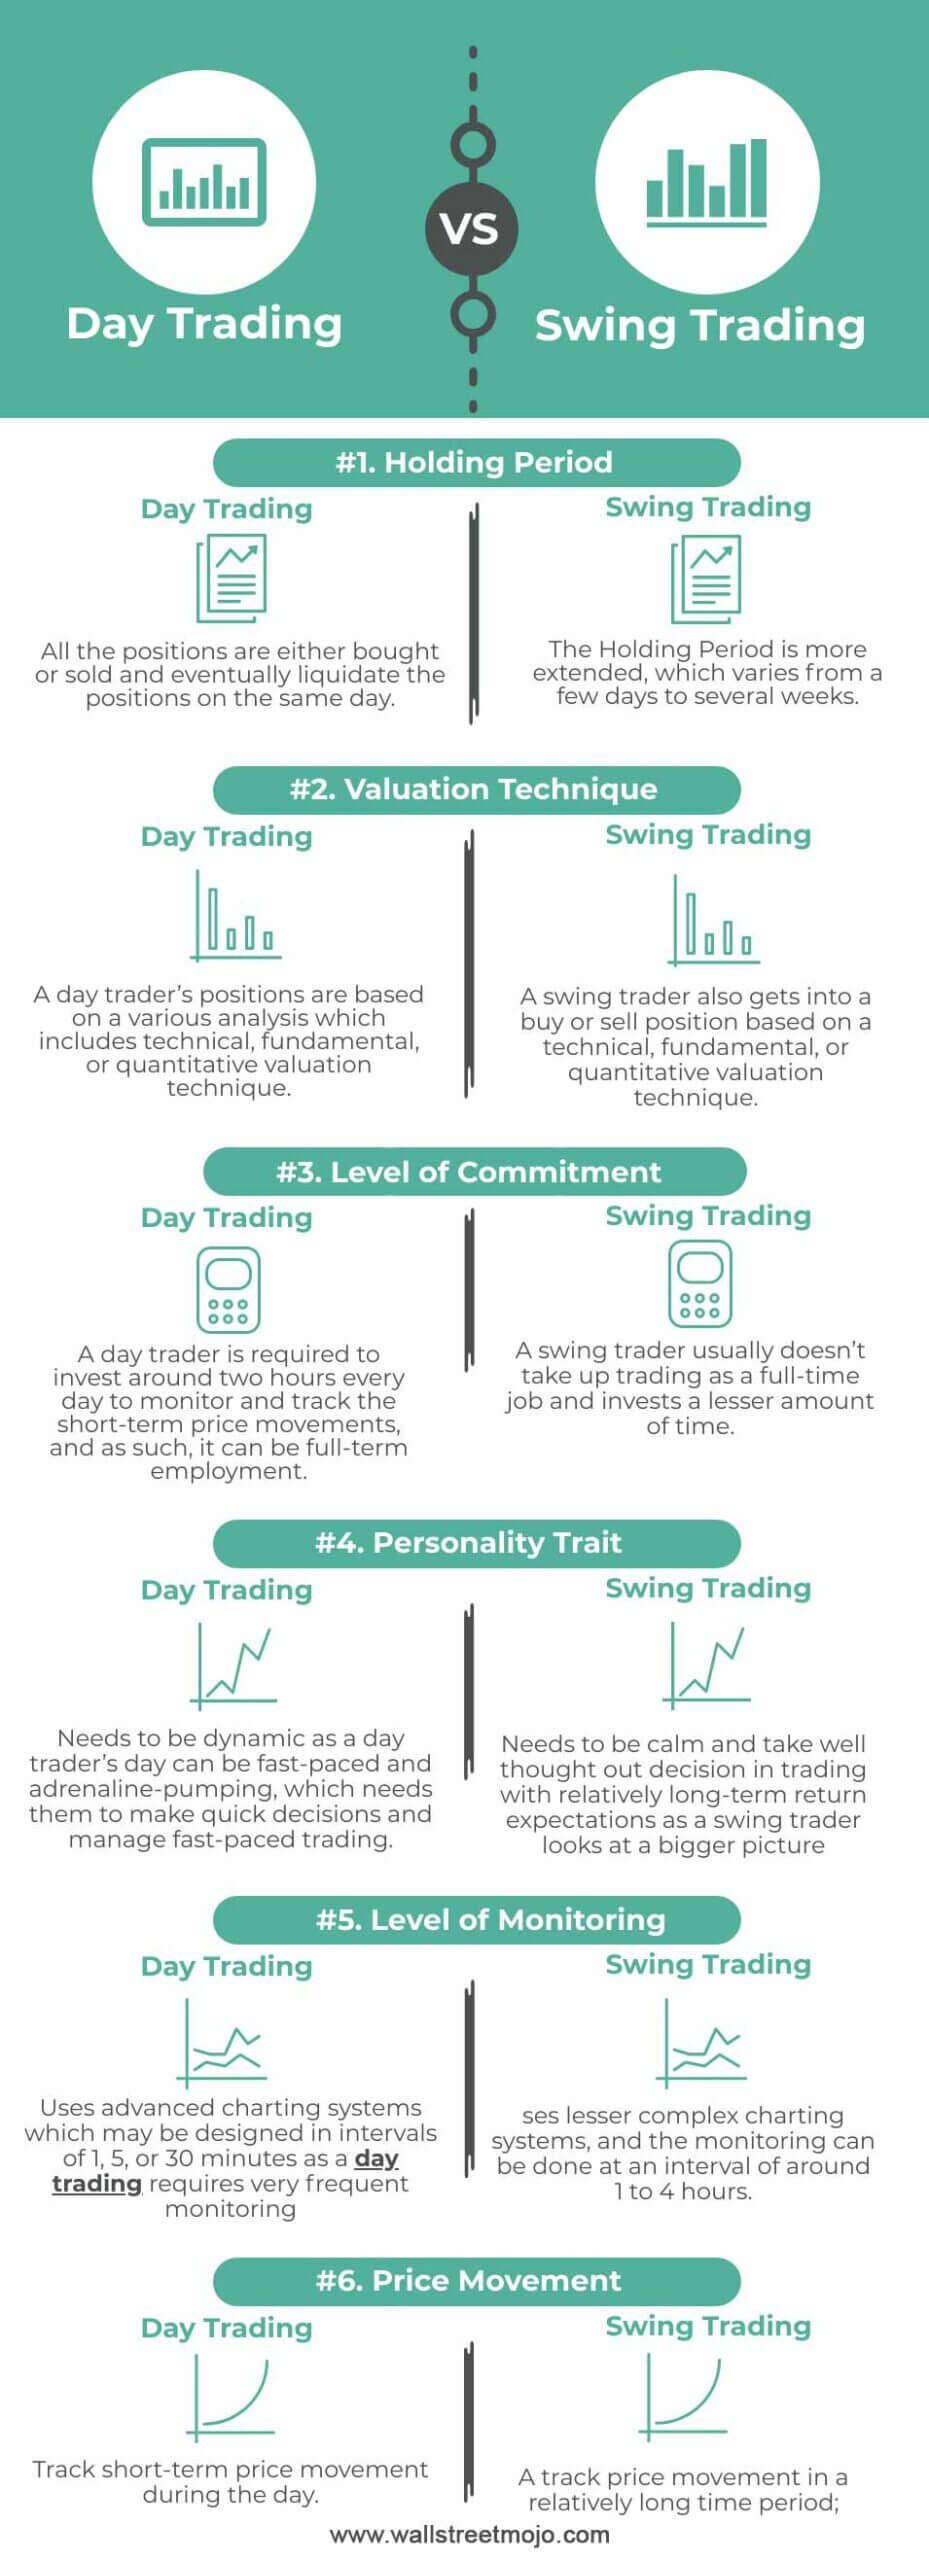 Day Trading vs Swing Trading | Which Trading to Choose?